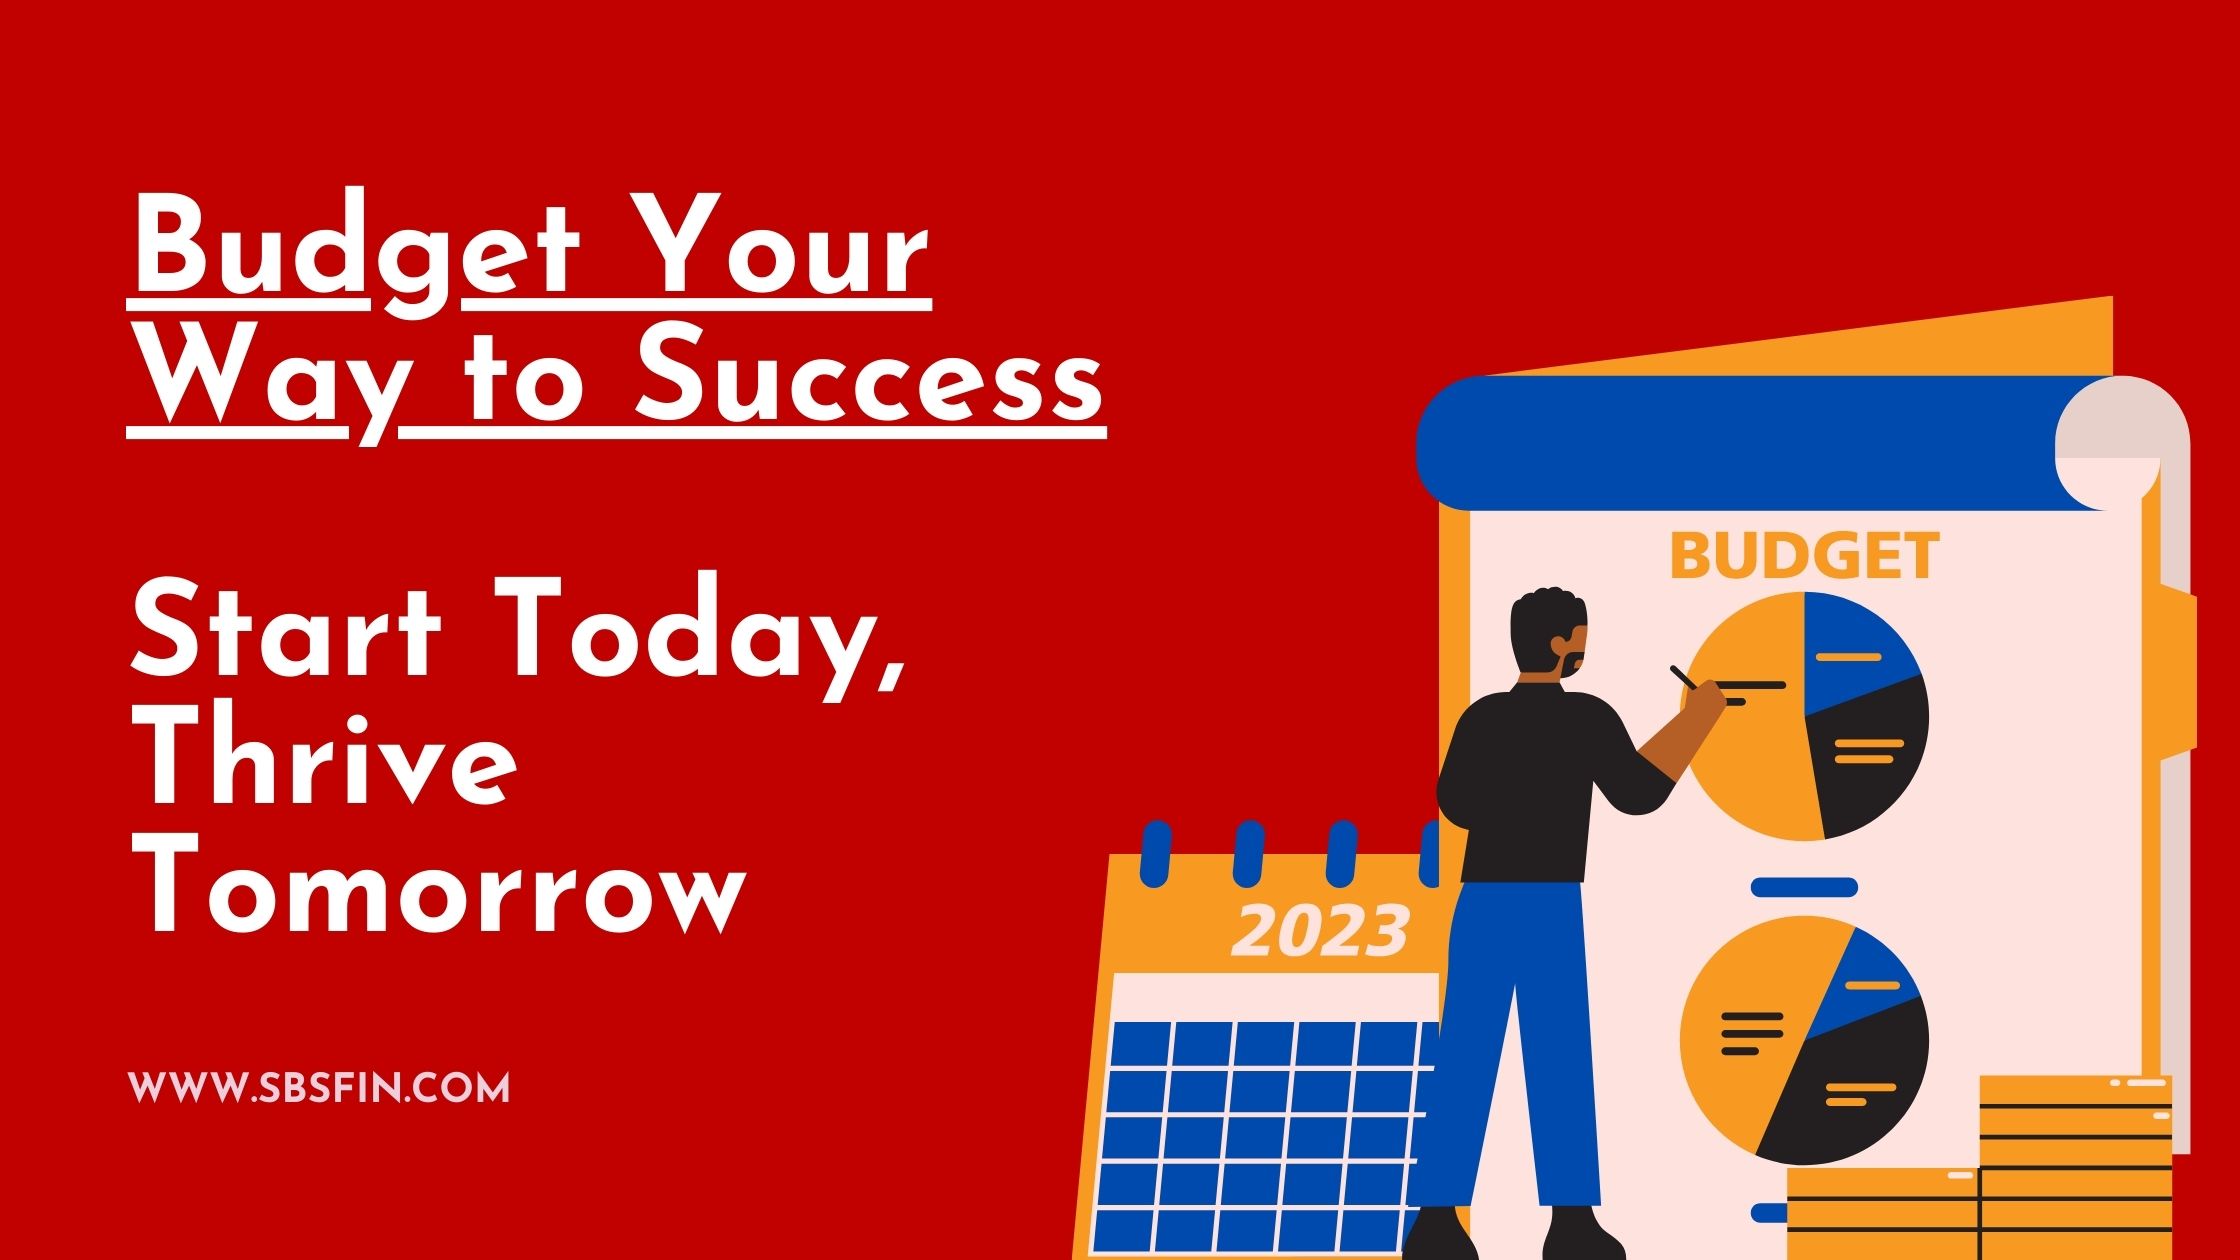 Budget Your Way to Success: Start Today, Thrive Tomorrow